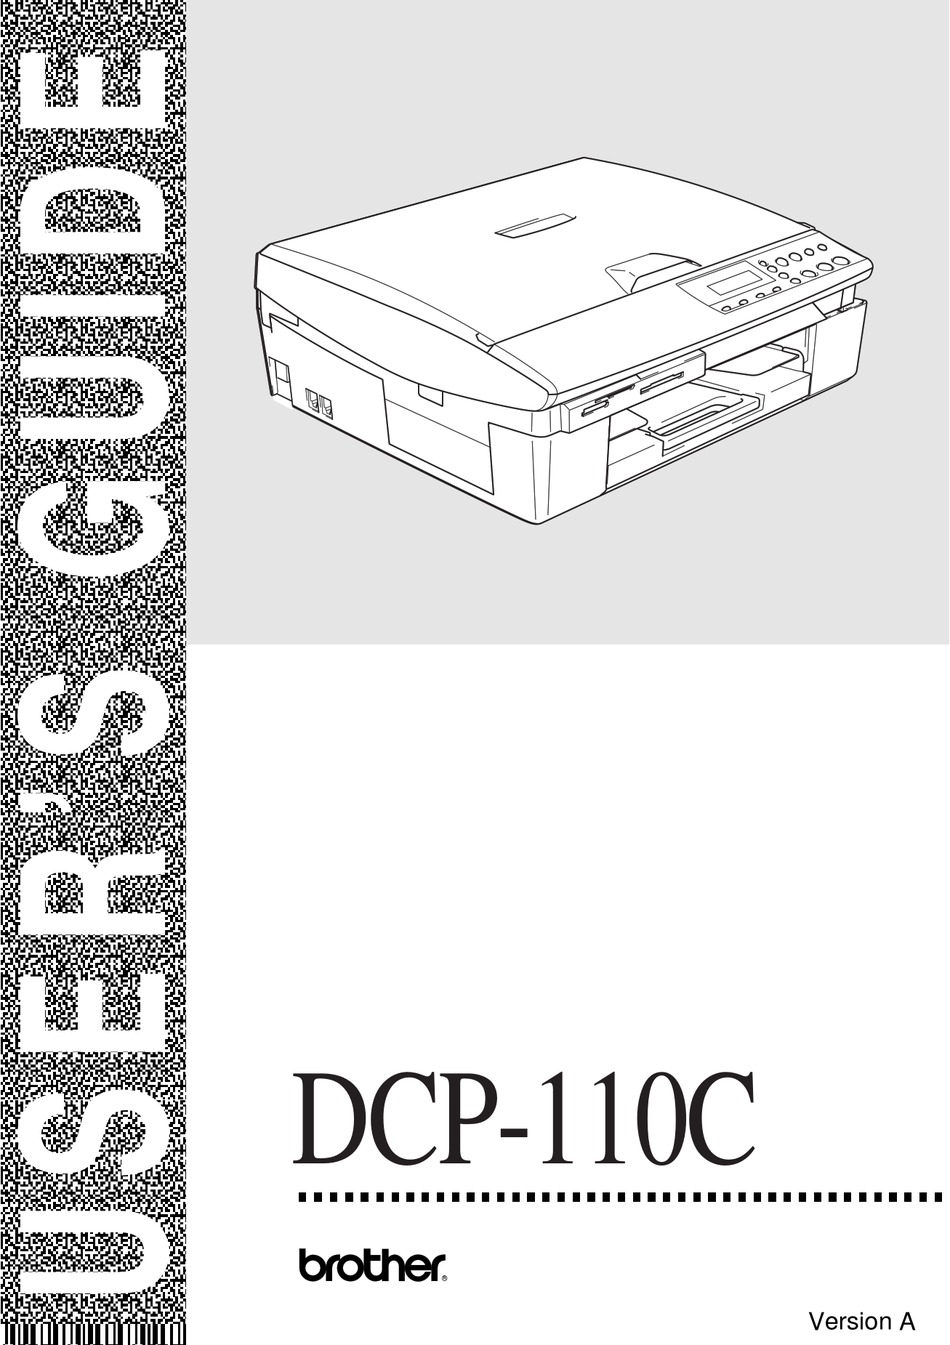 Инструкция brother dcp. Brother DCP-110c. MFC-210c. Brother ot-443 service manual. MFC II Rapid Evolution 2007 manual.